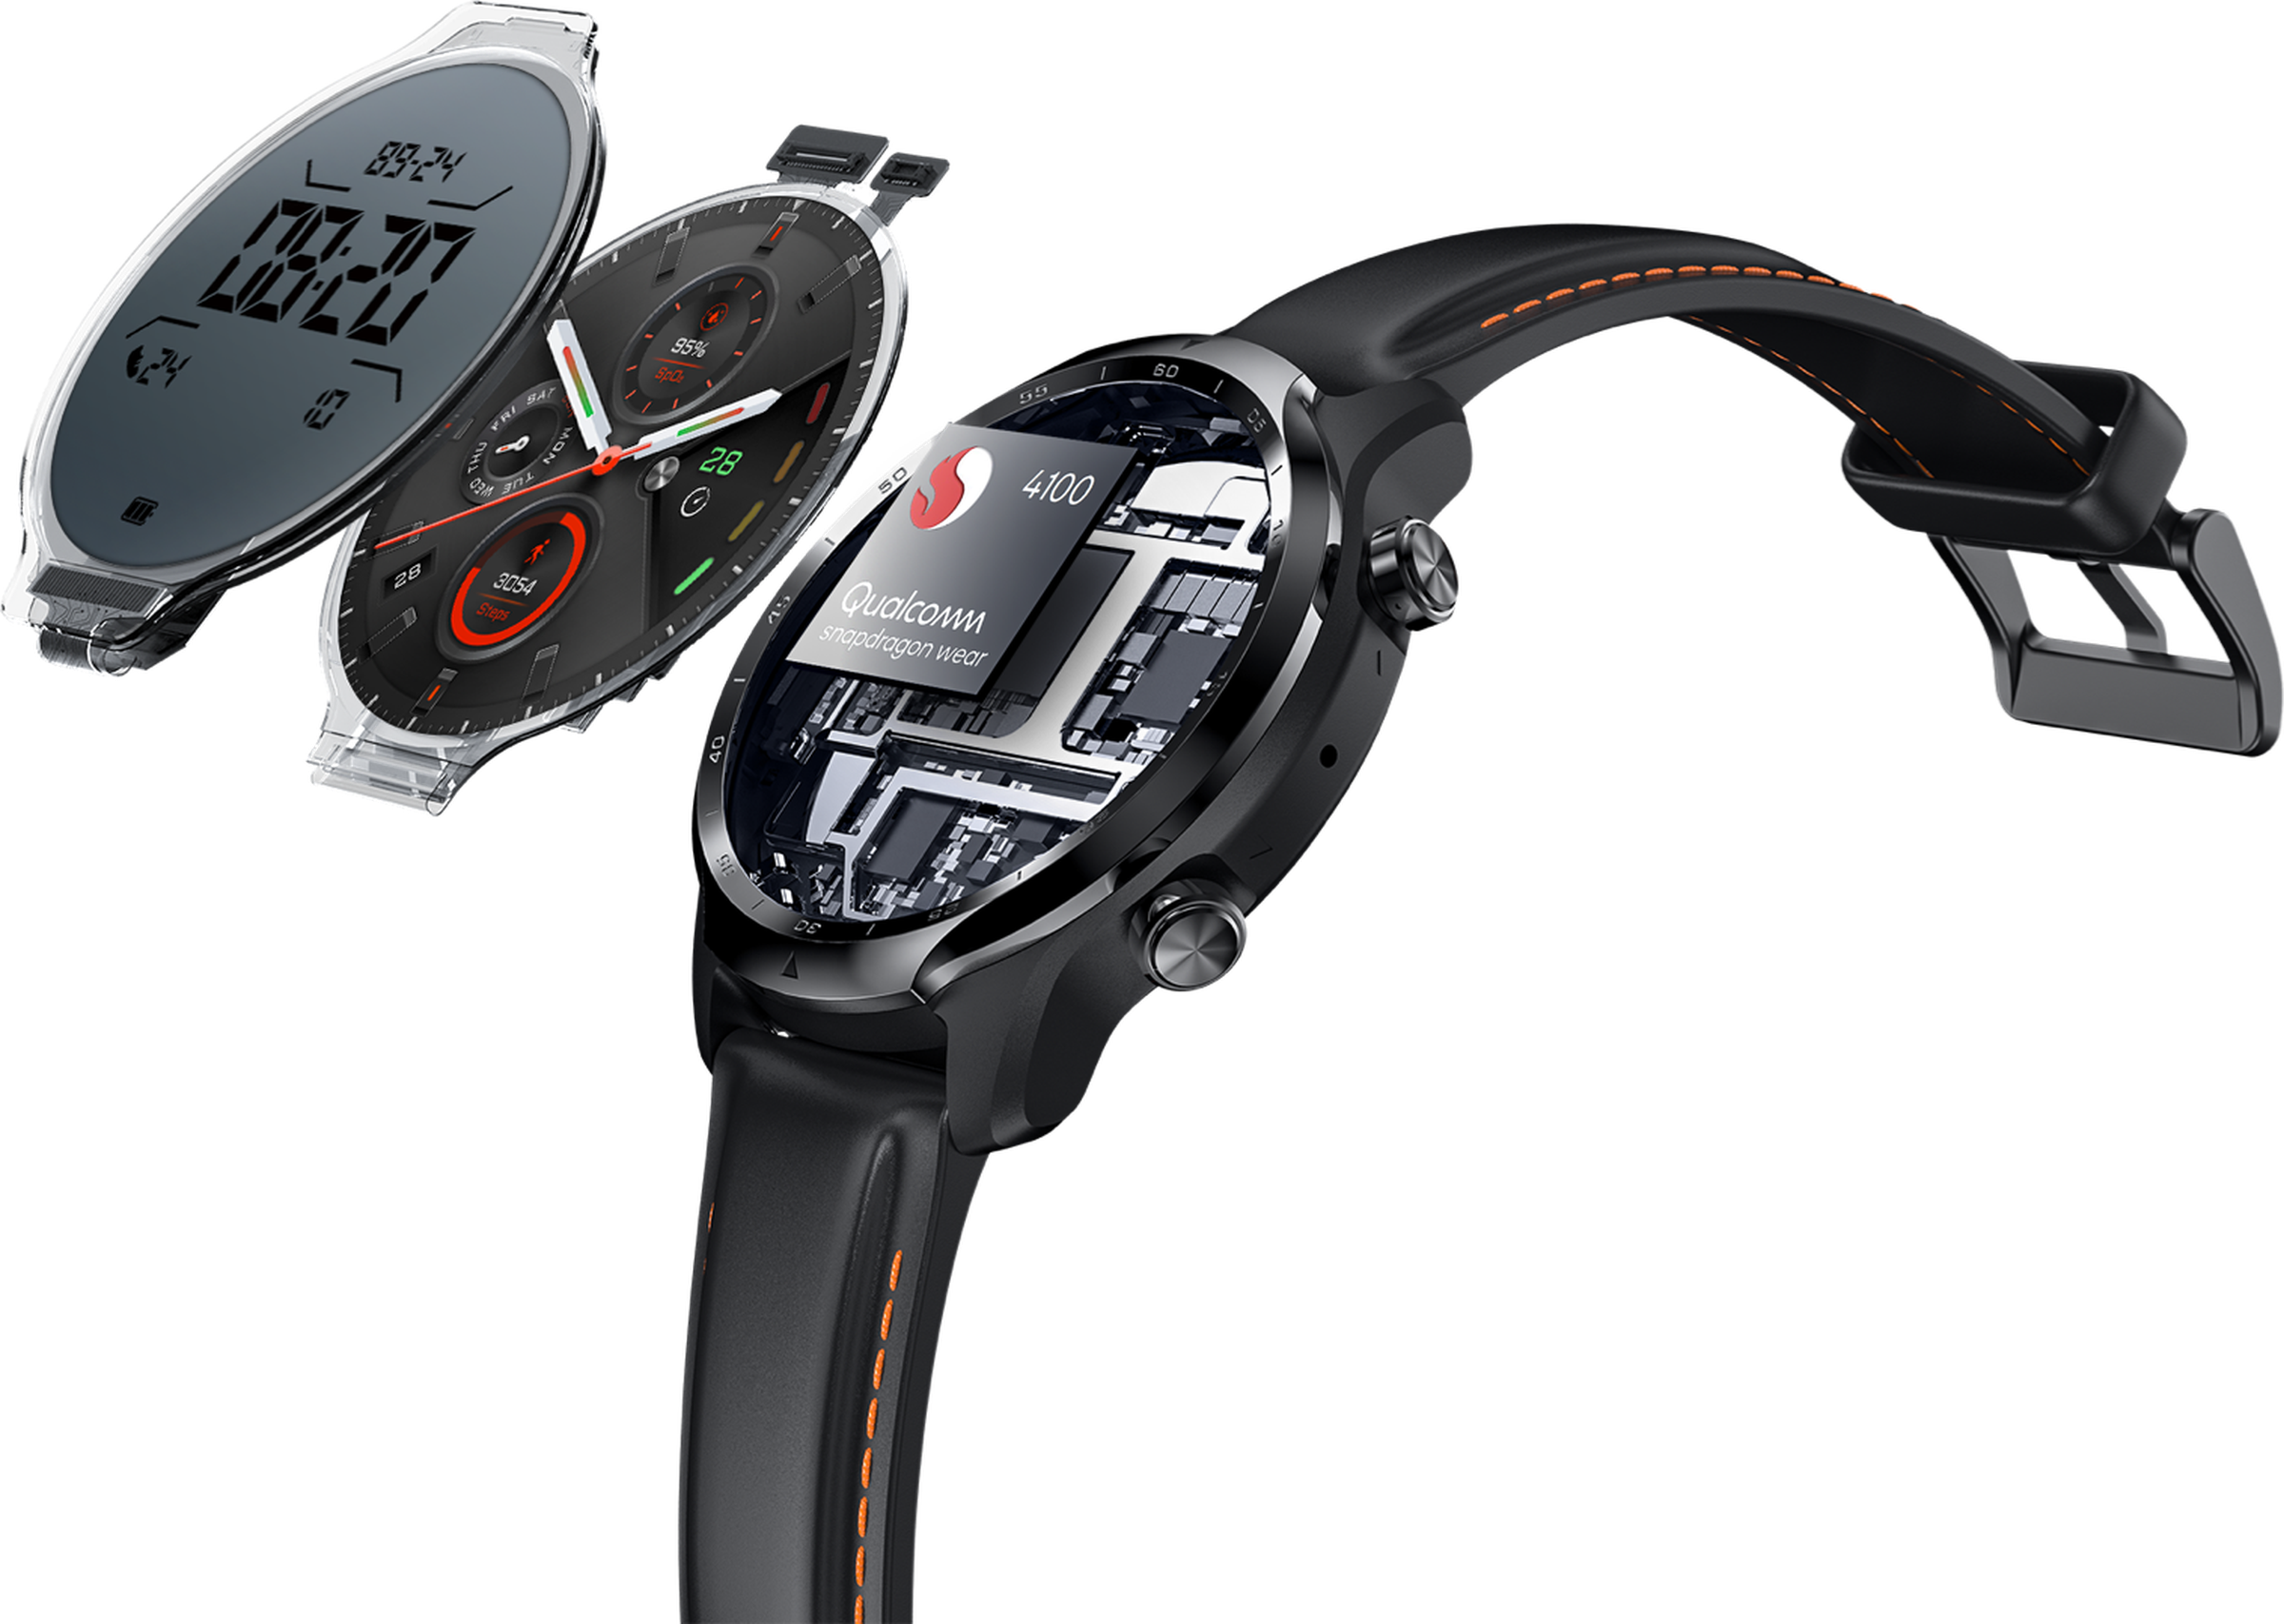 The dual-display design returns from the TicWatch Pro.